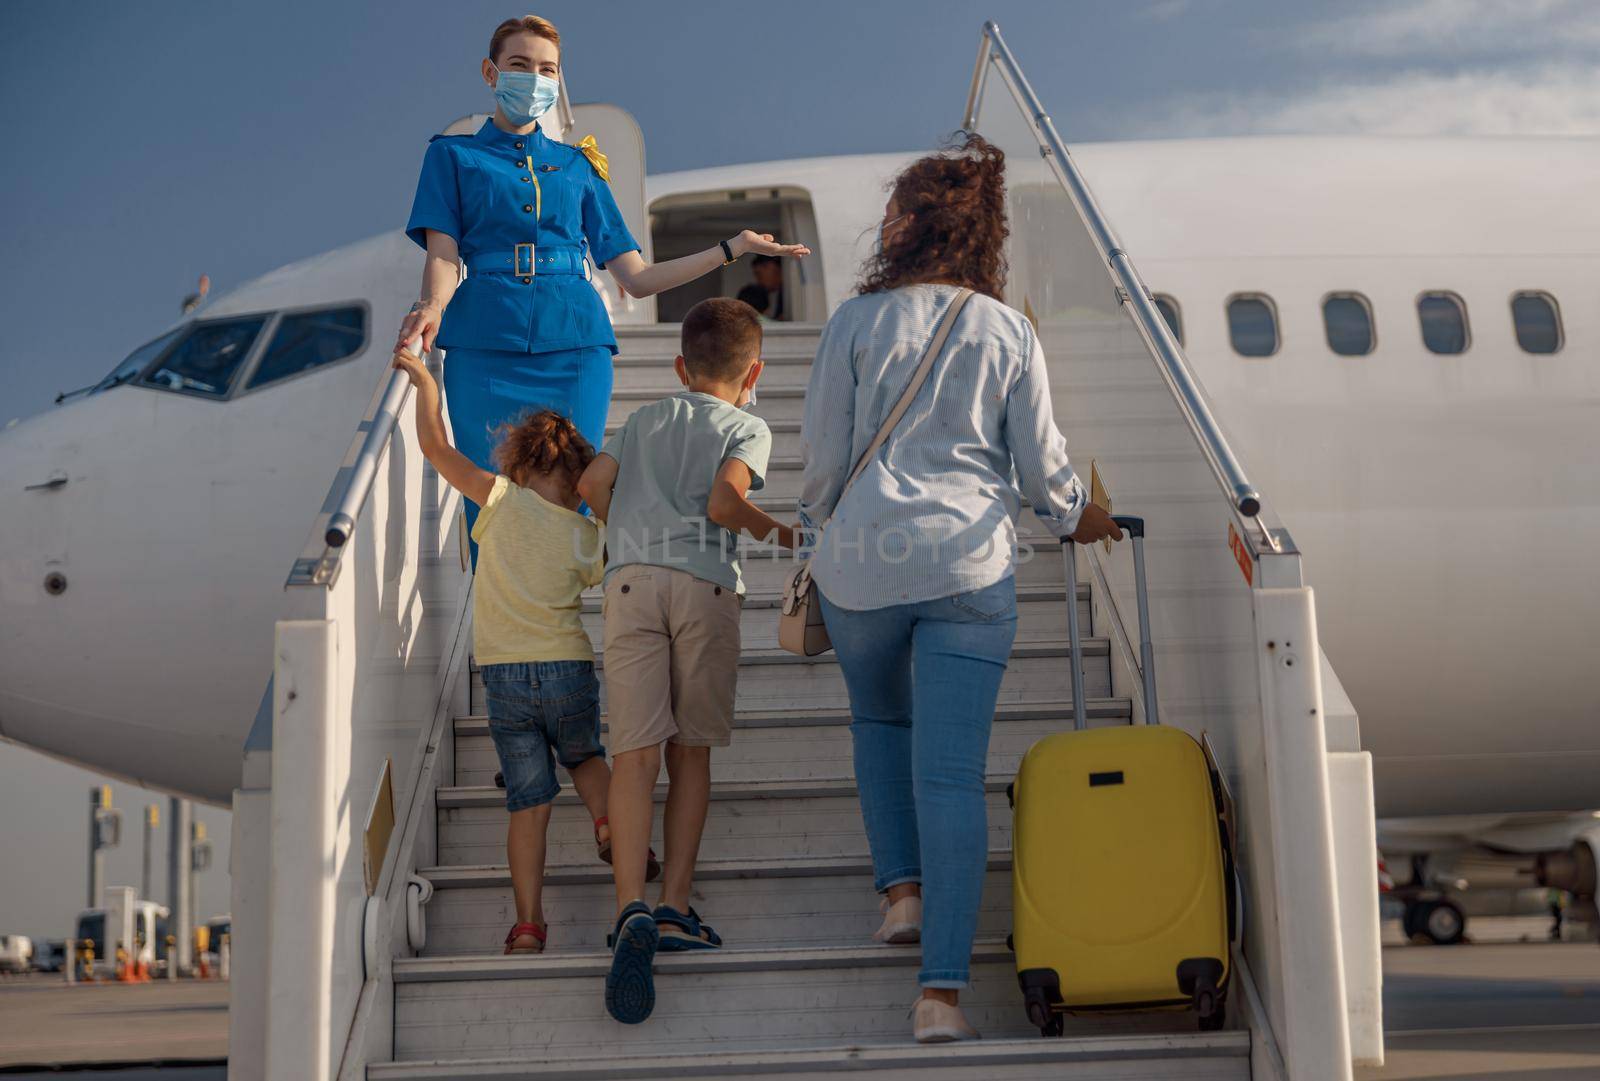 Back view of mother with two little kids and suitcase boarding the plane. Air stewardess wearing protective mask welcoming the family by Yaroslav_astakhov